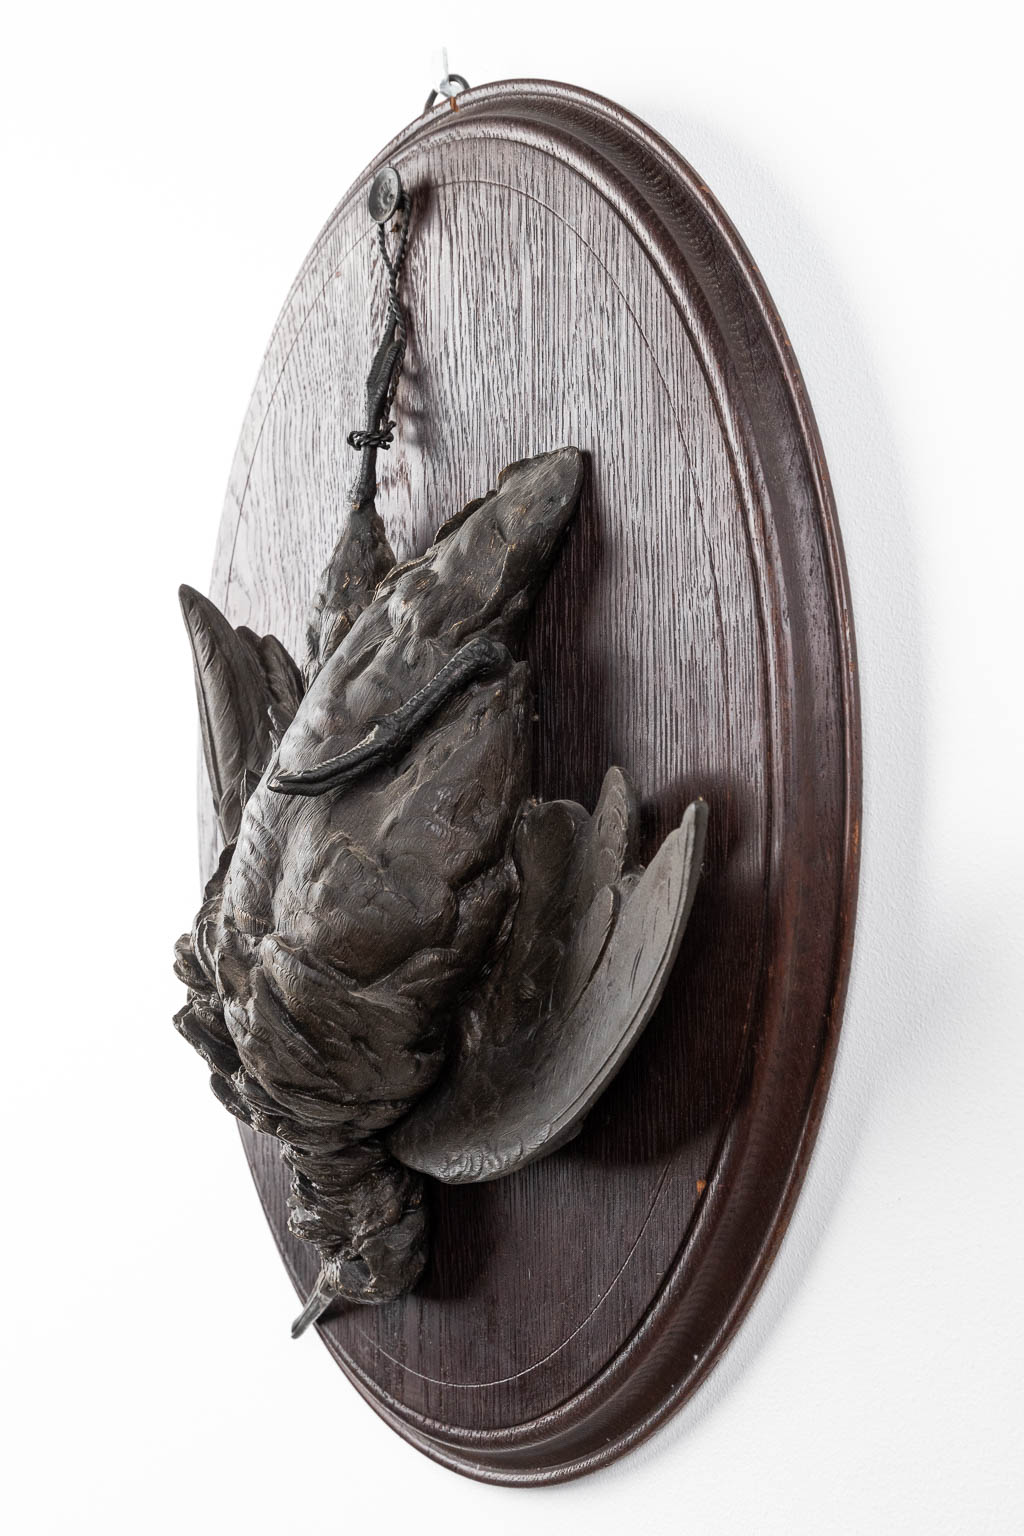 A pair of wall-mounted 'Hunting Trophies', patinated bronze mounted on wood. (D:7 x W:33 x H:46 cm) - Image 8 of 15